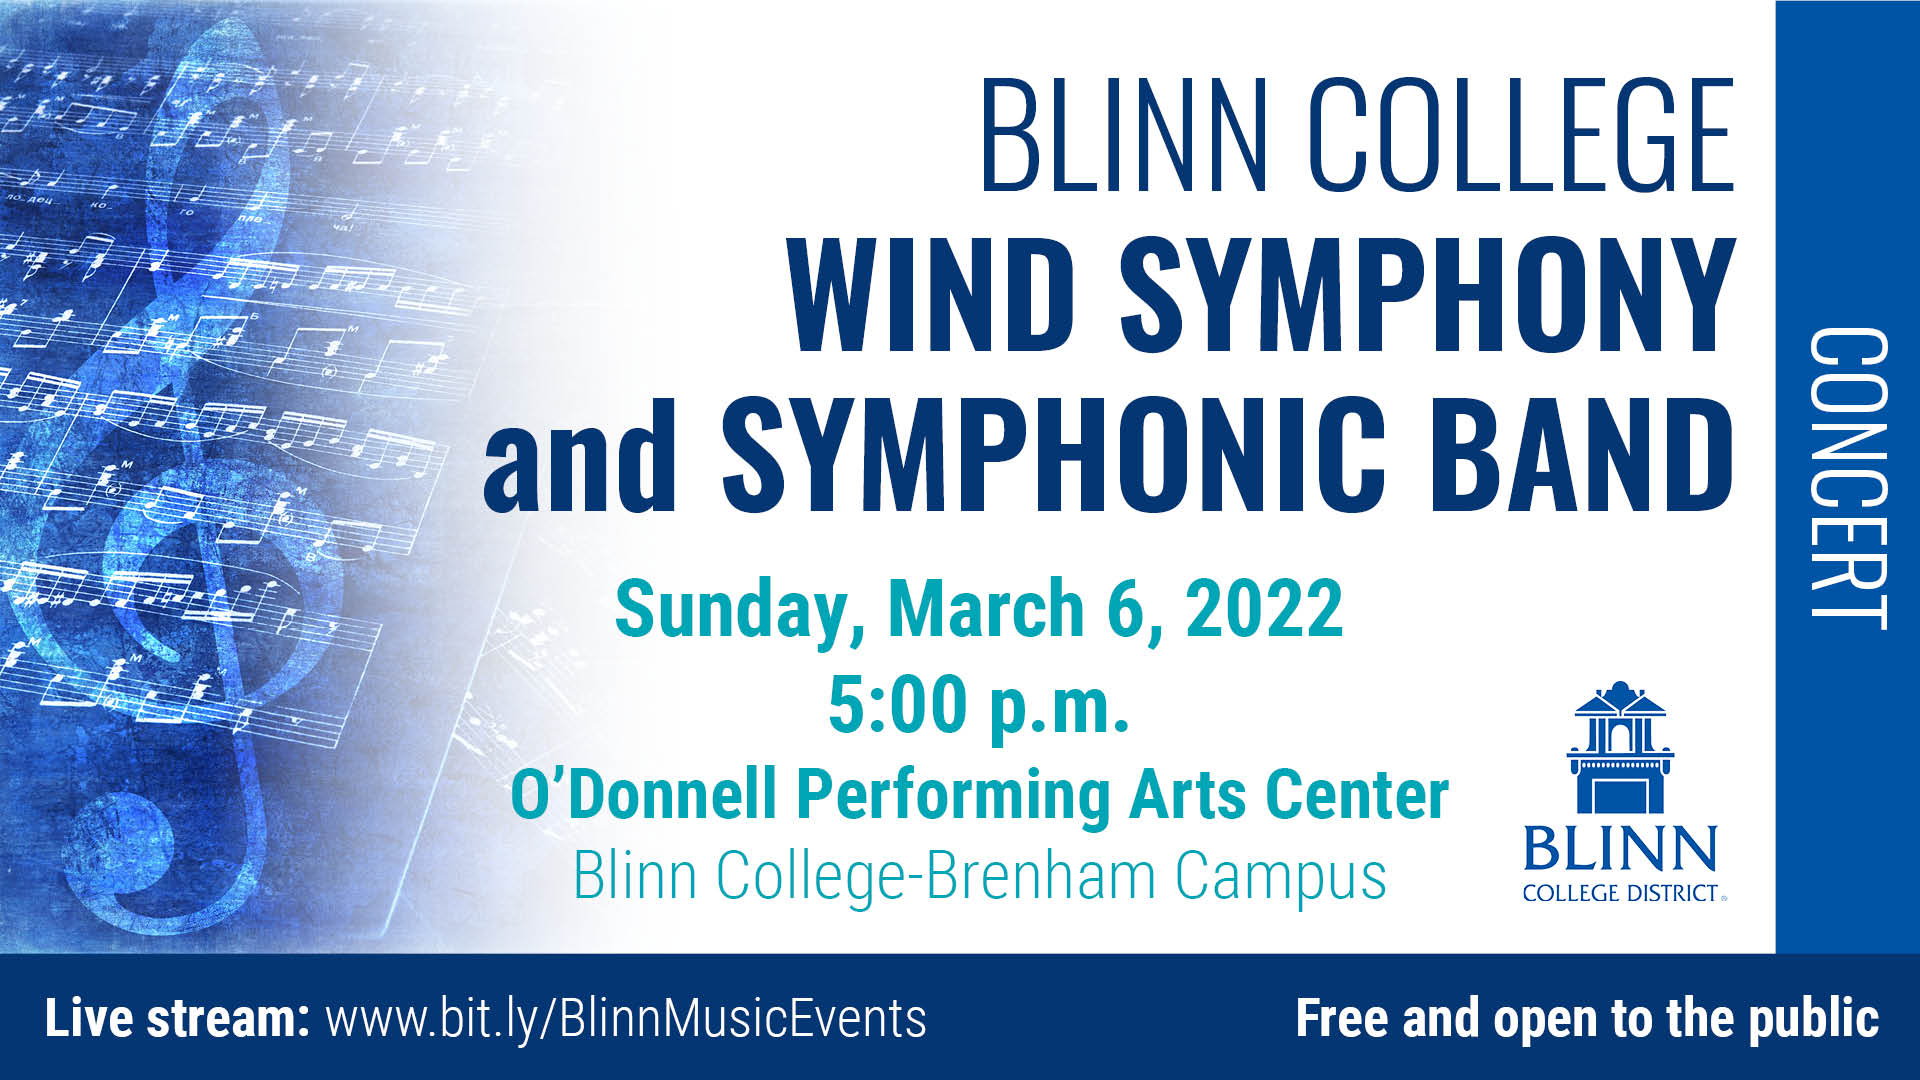 Blinn College Wind Symphony and Symphonic Band